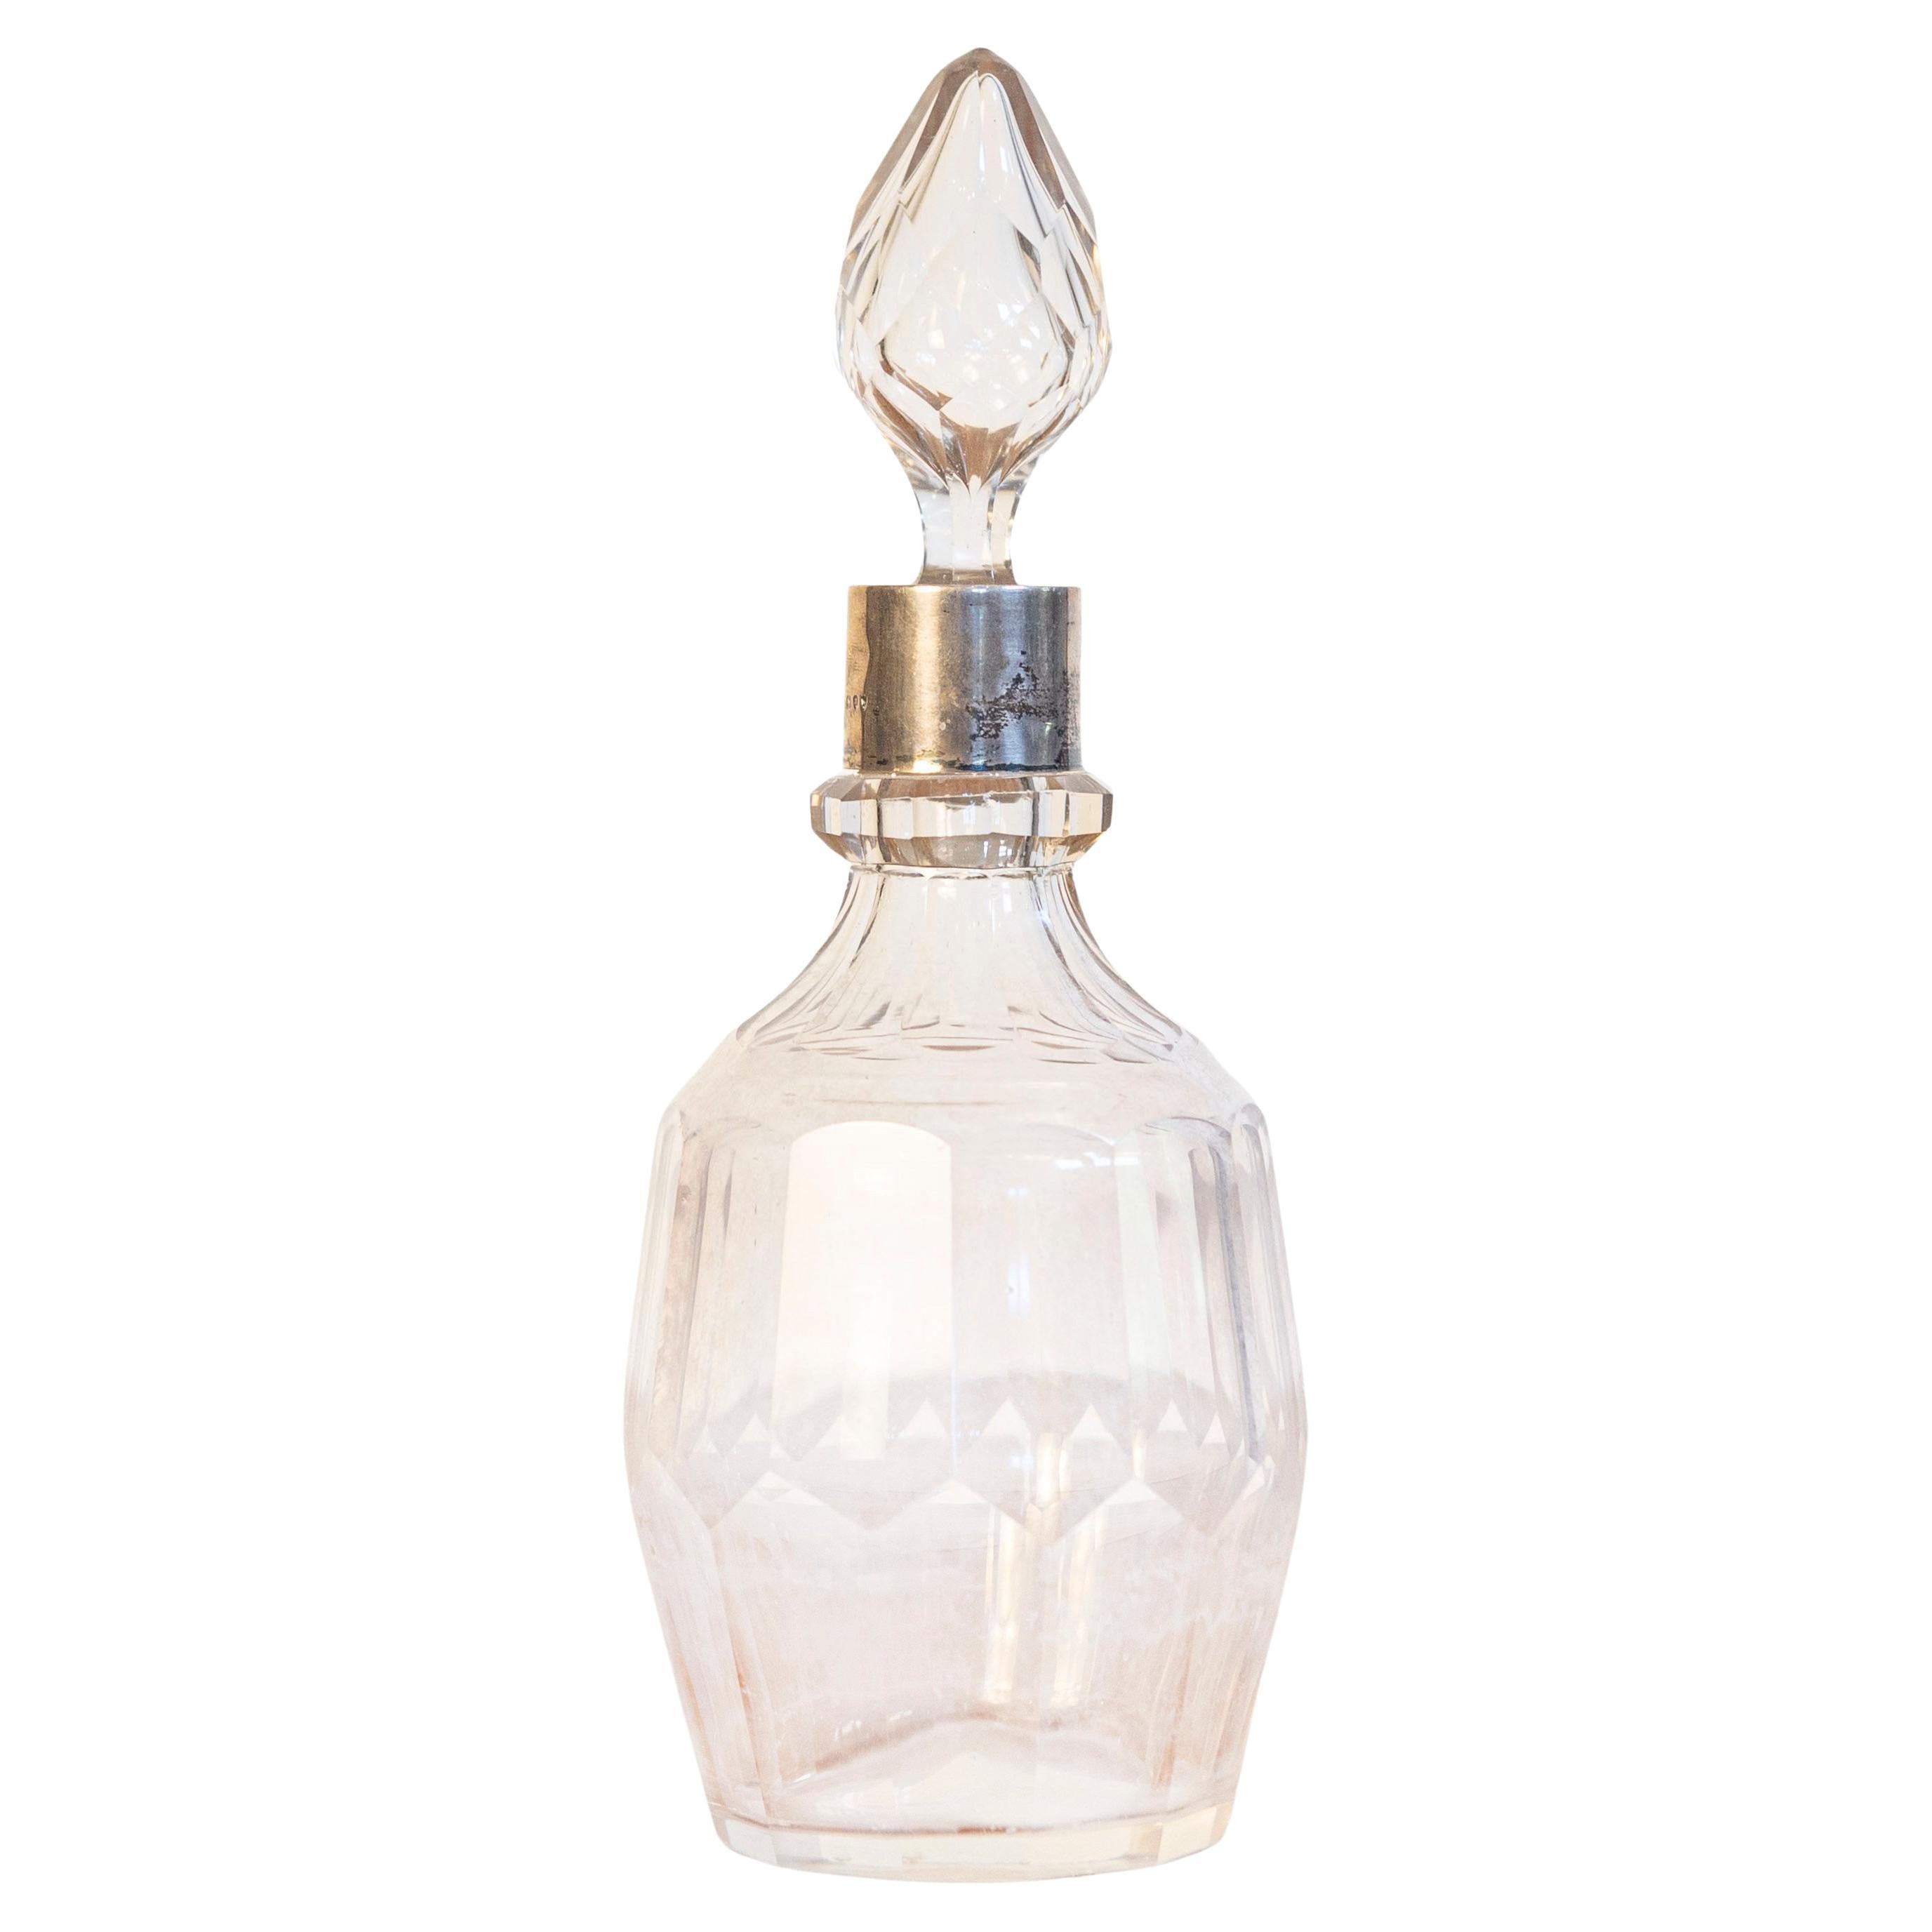 English Early 19th Century Crystal Toiletry Bottle with Stopper and Silver Neck